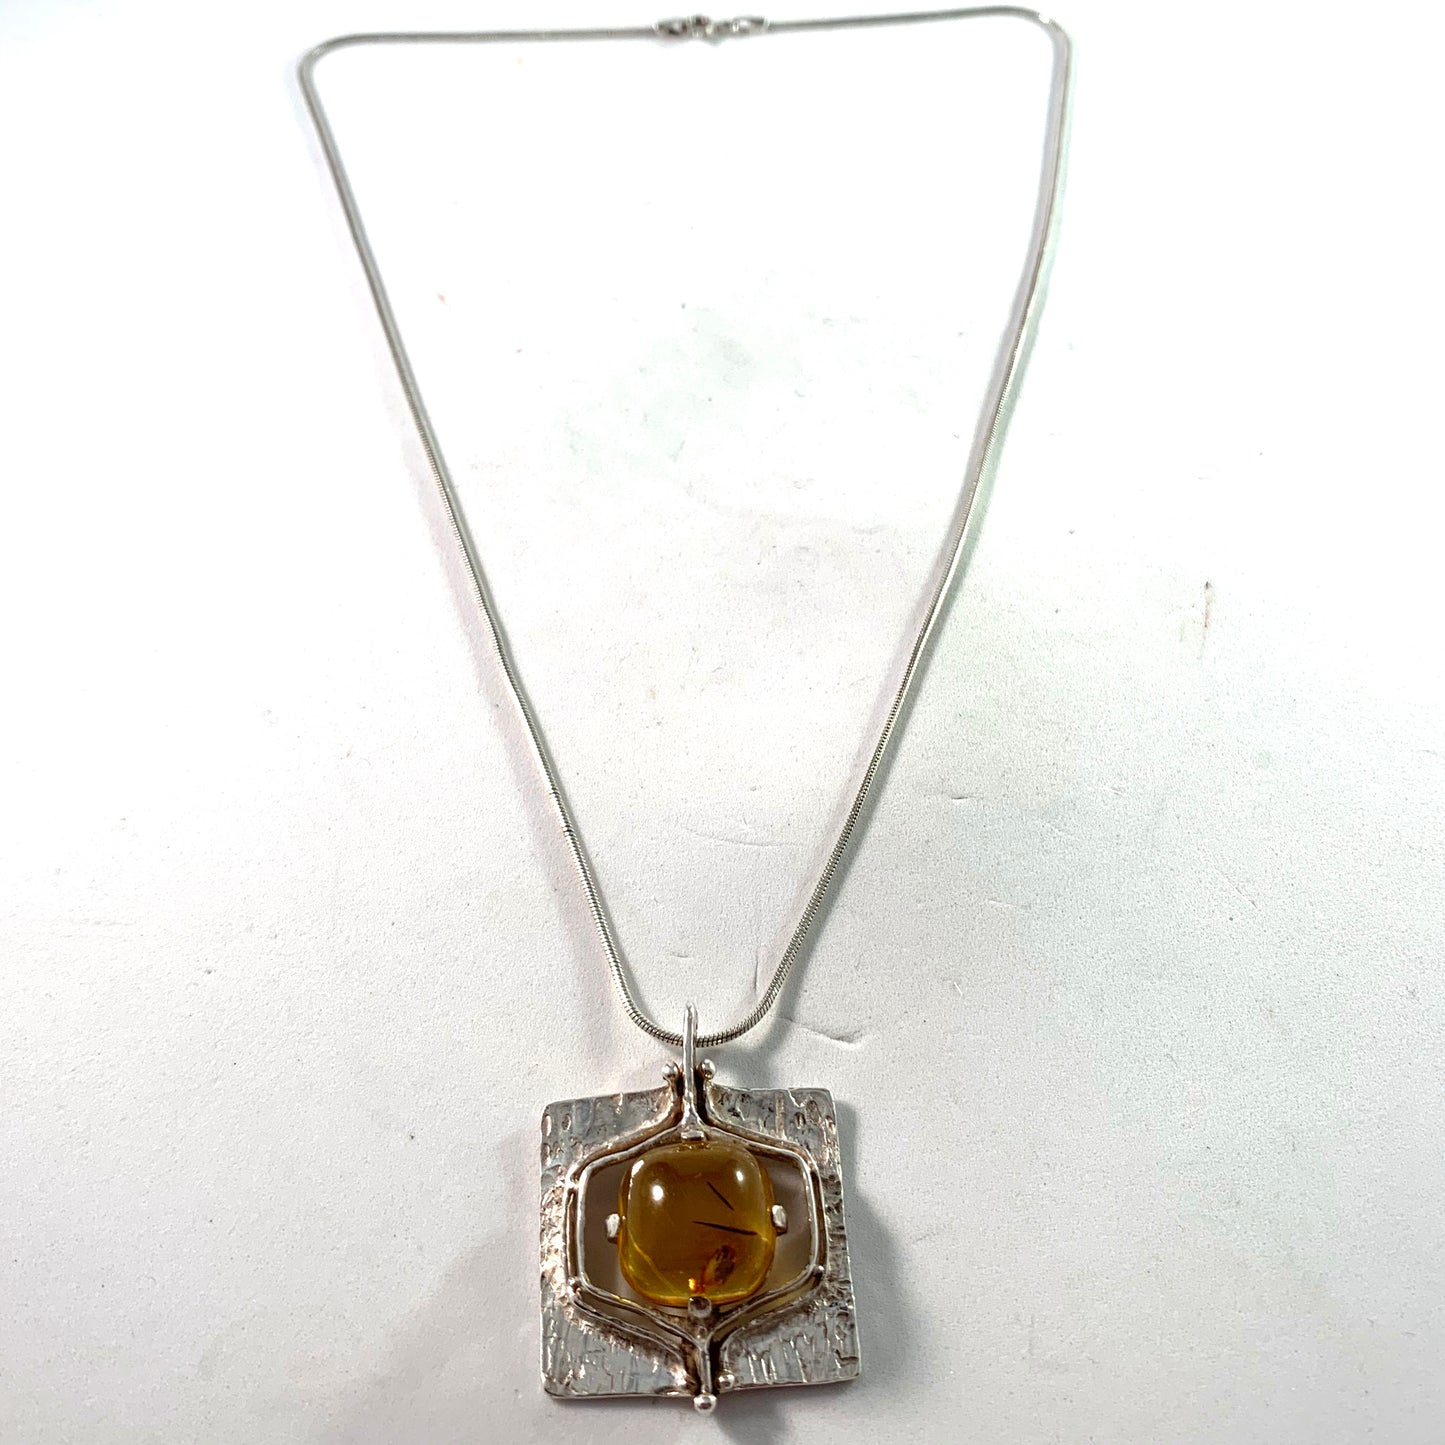 Teka, Theodor Klotz, Germany 1960s Sterling Silver Baltic Amber Pendant Necklace.